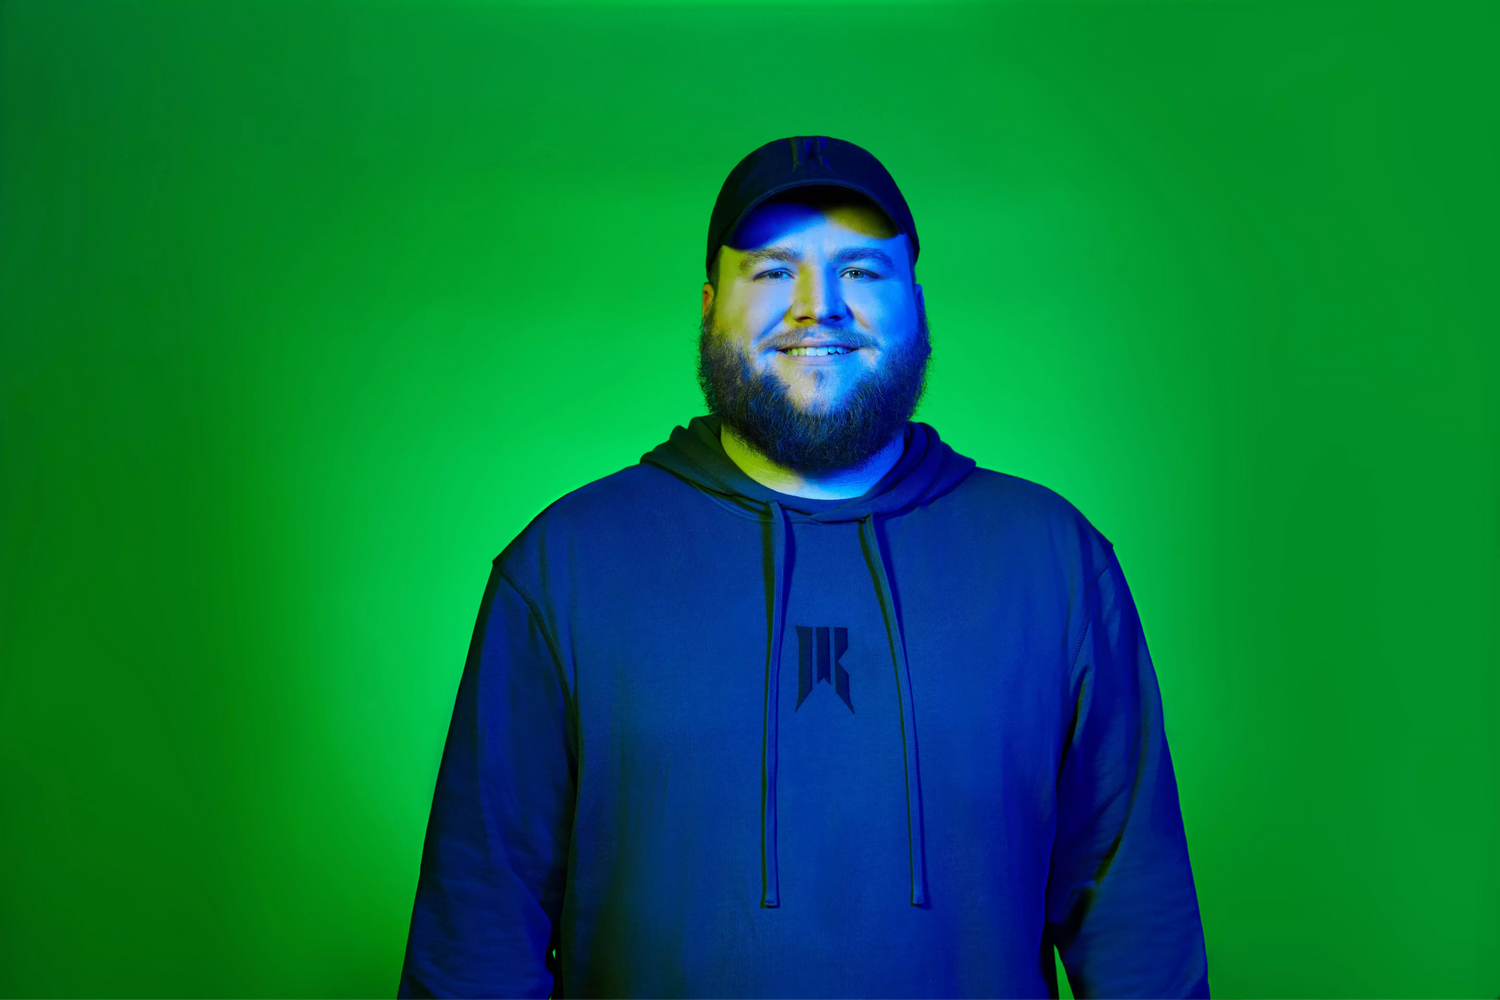 Player (Bestman) with a Rebellion hoodie and a green background